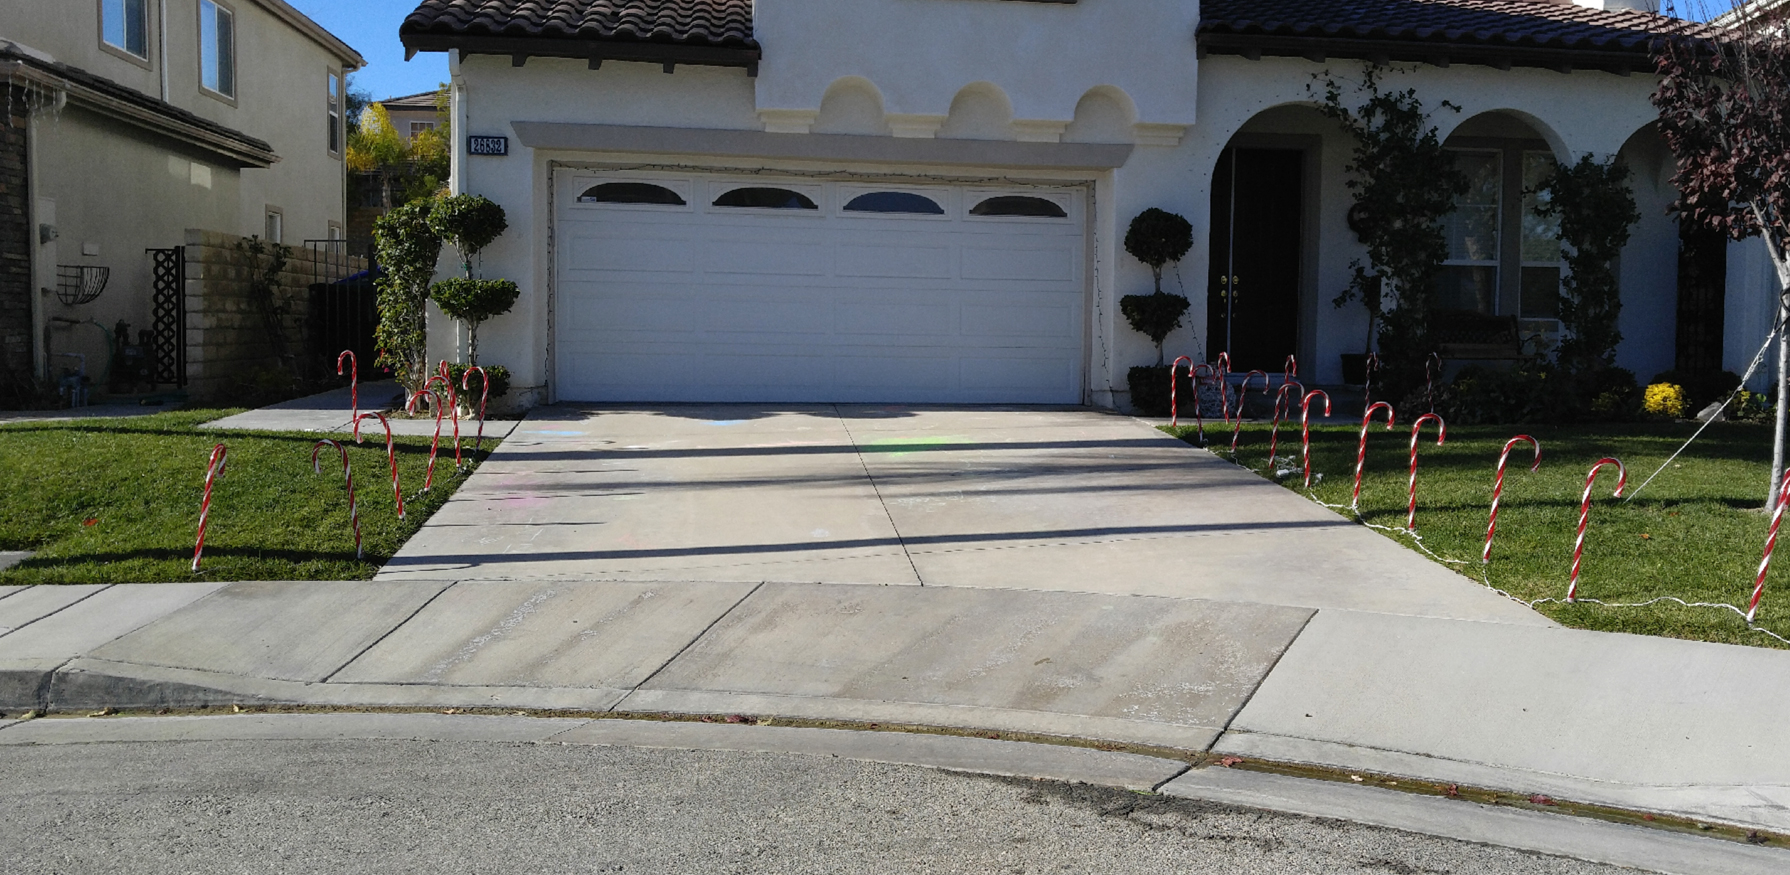 Driveway before